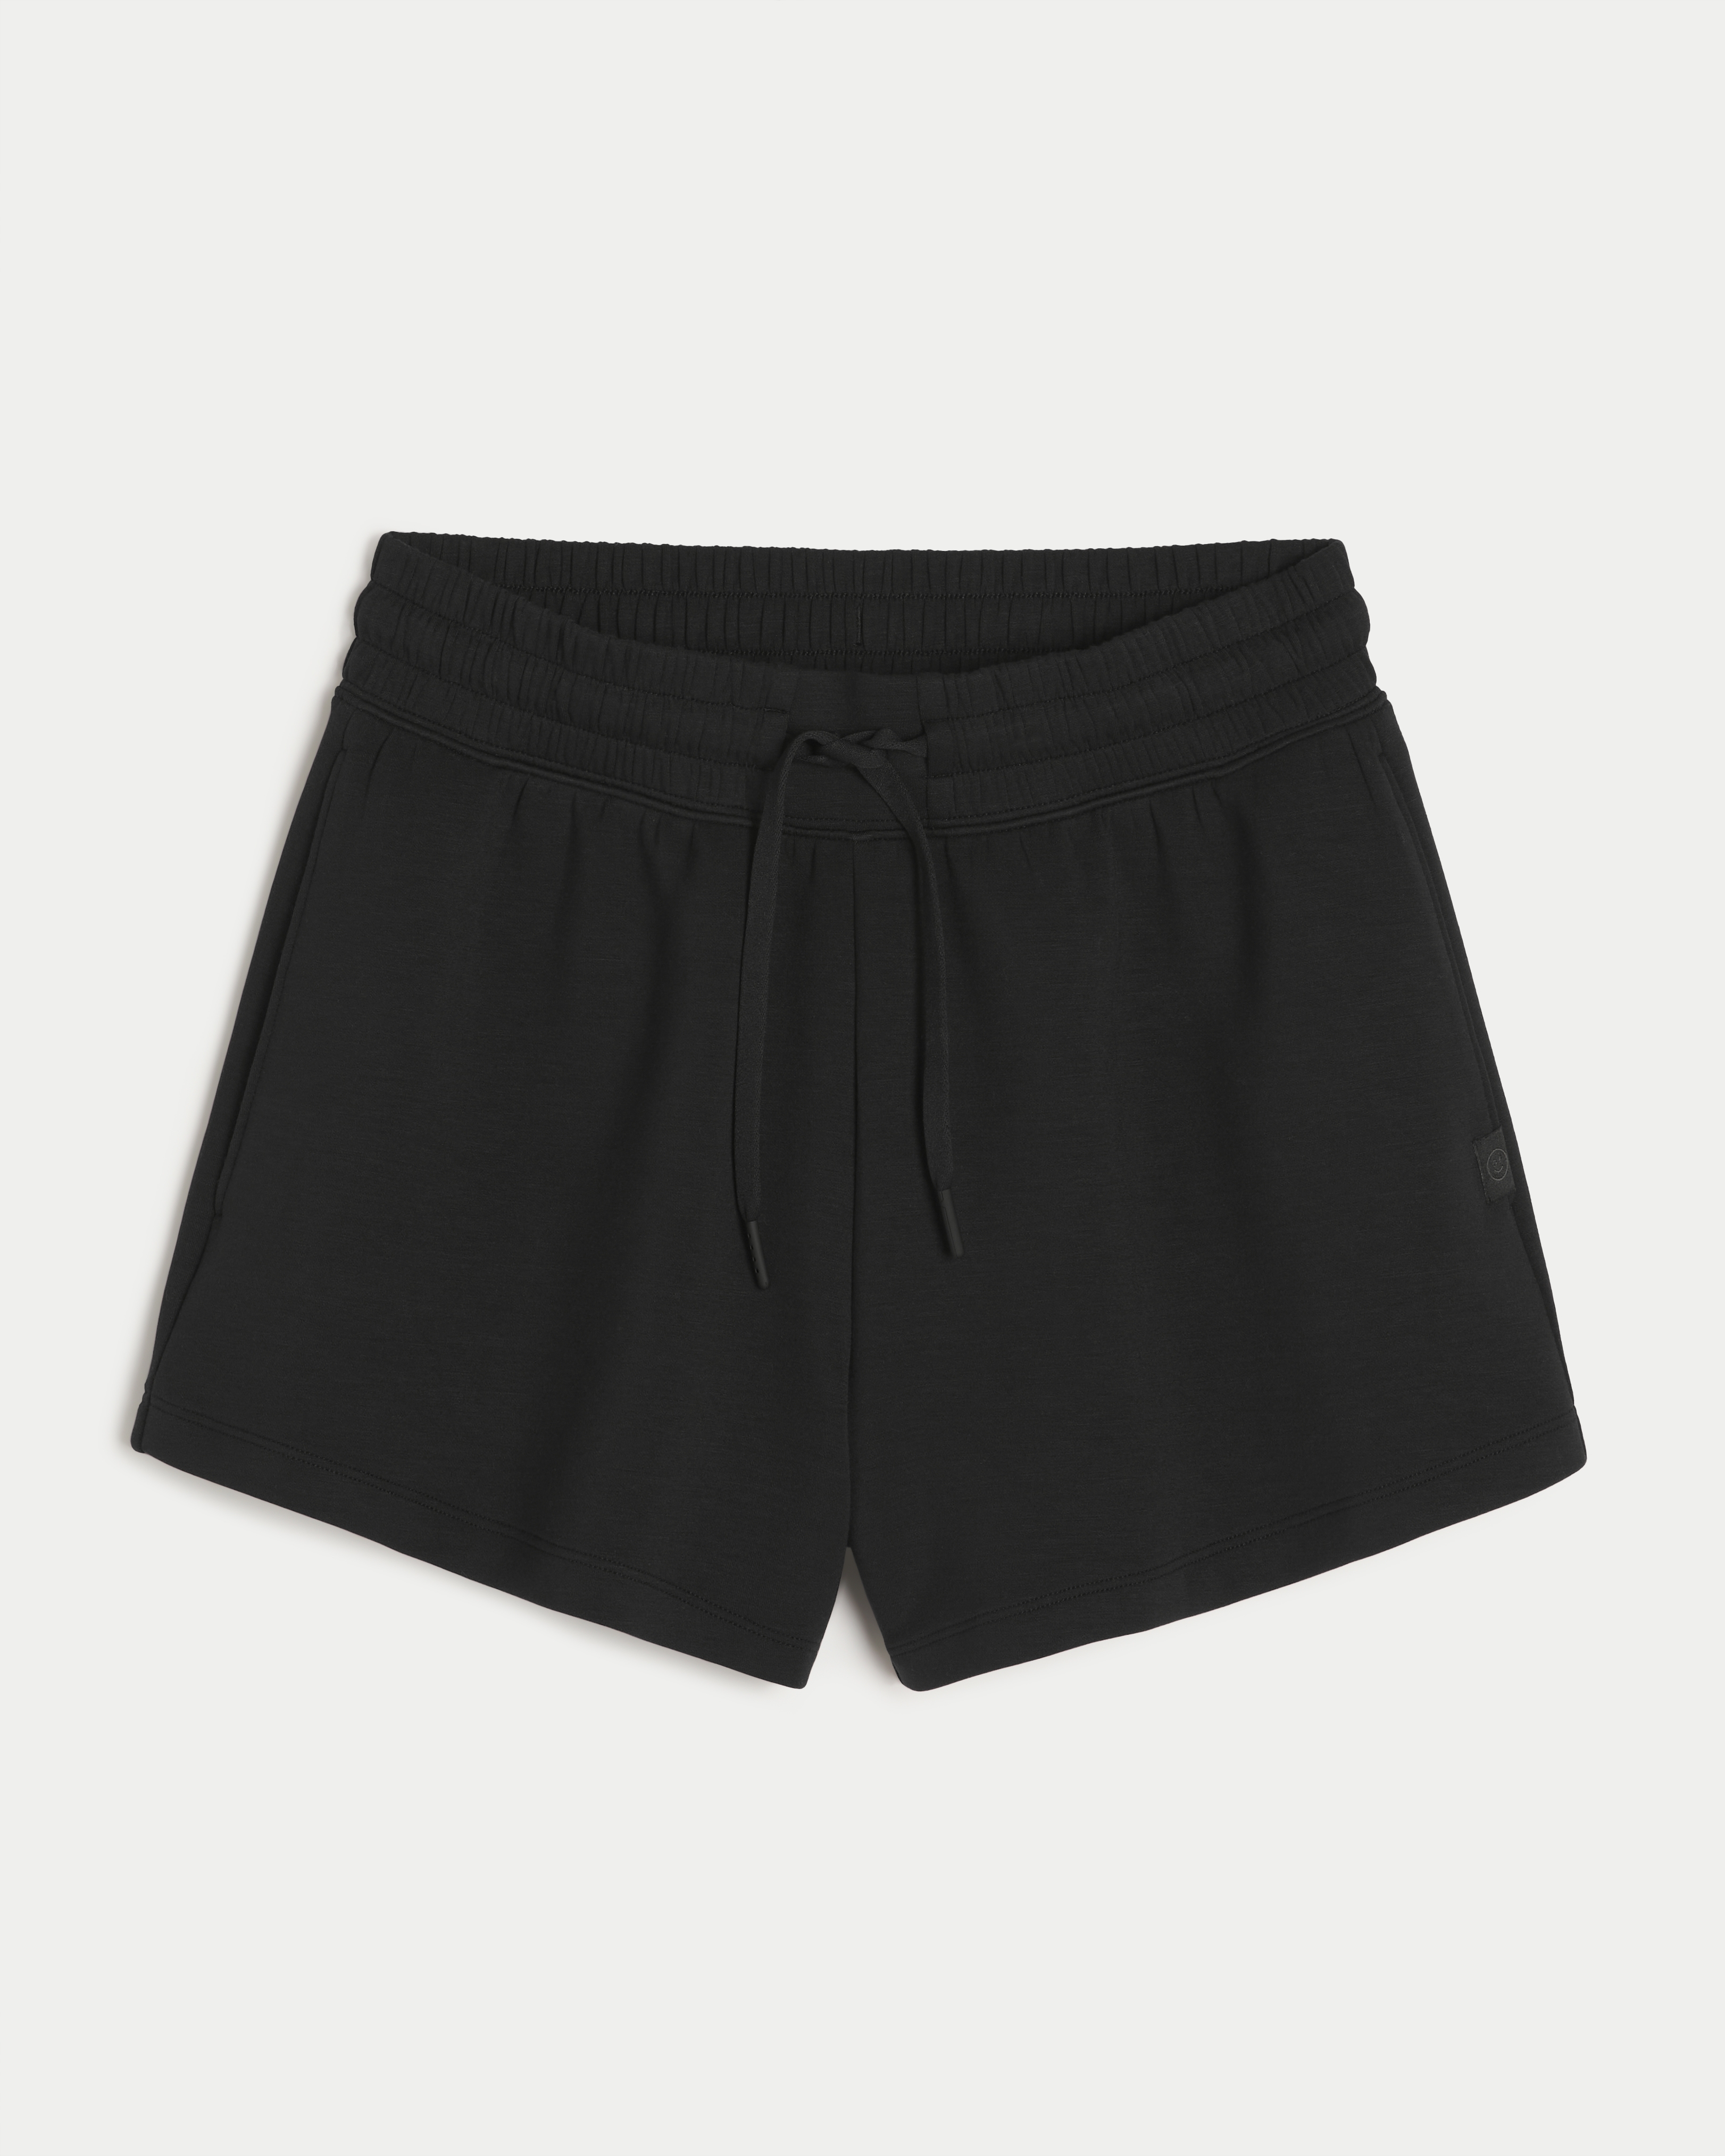 Gilly Hicks Active Cooldown Shorts